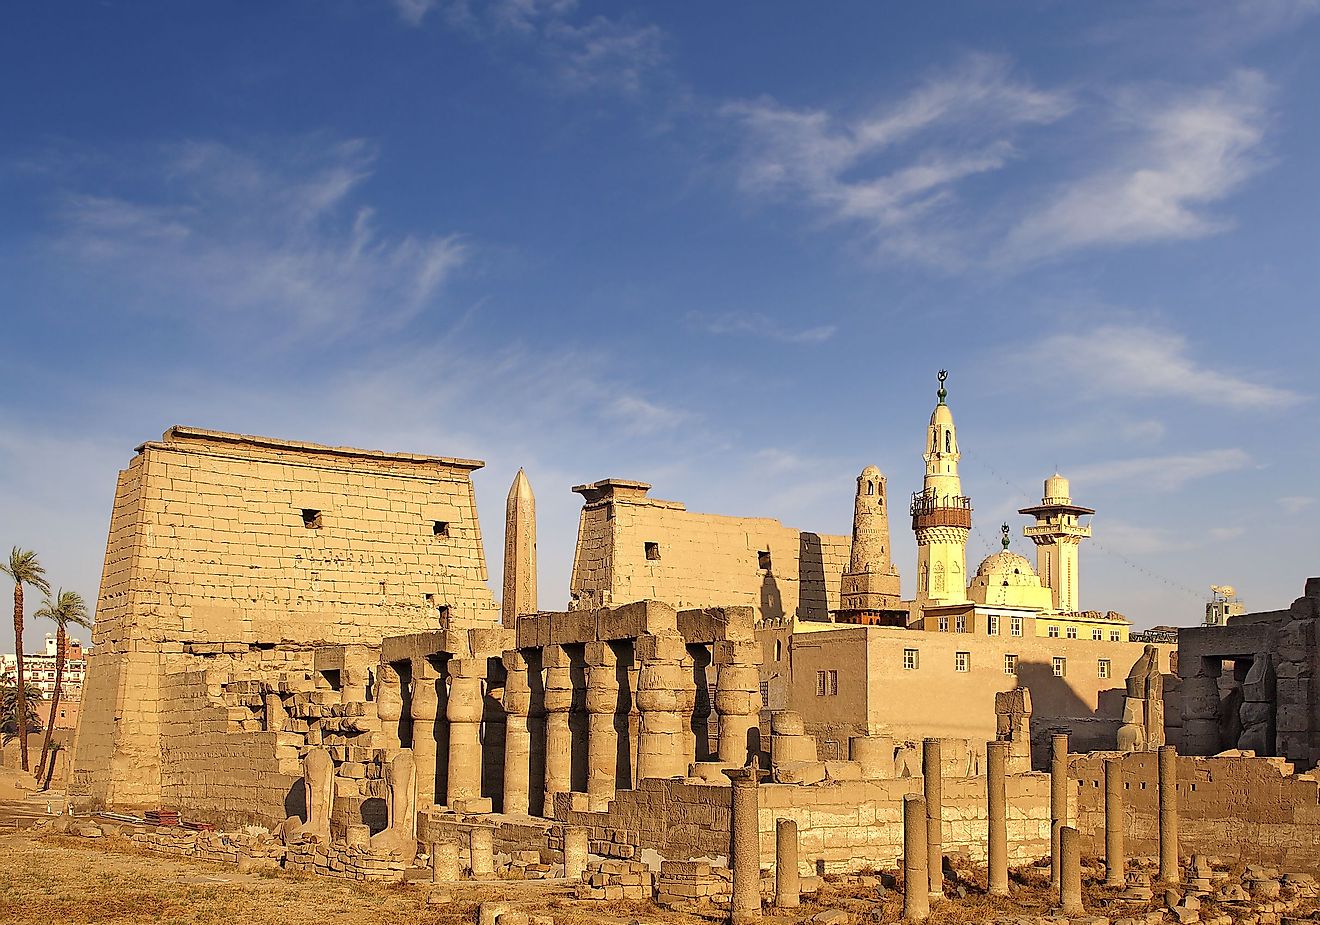 Luxor temple. Thebes, Egypt, UNESCO World Heritage Site. Image credit: Pecold via shutterstock